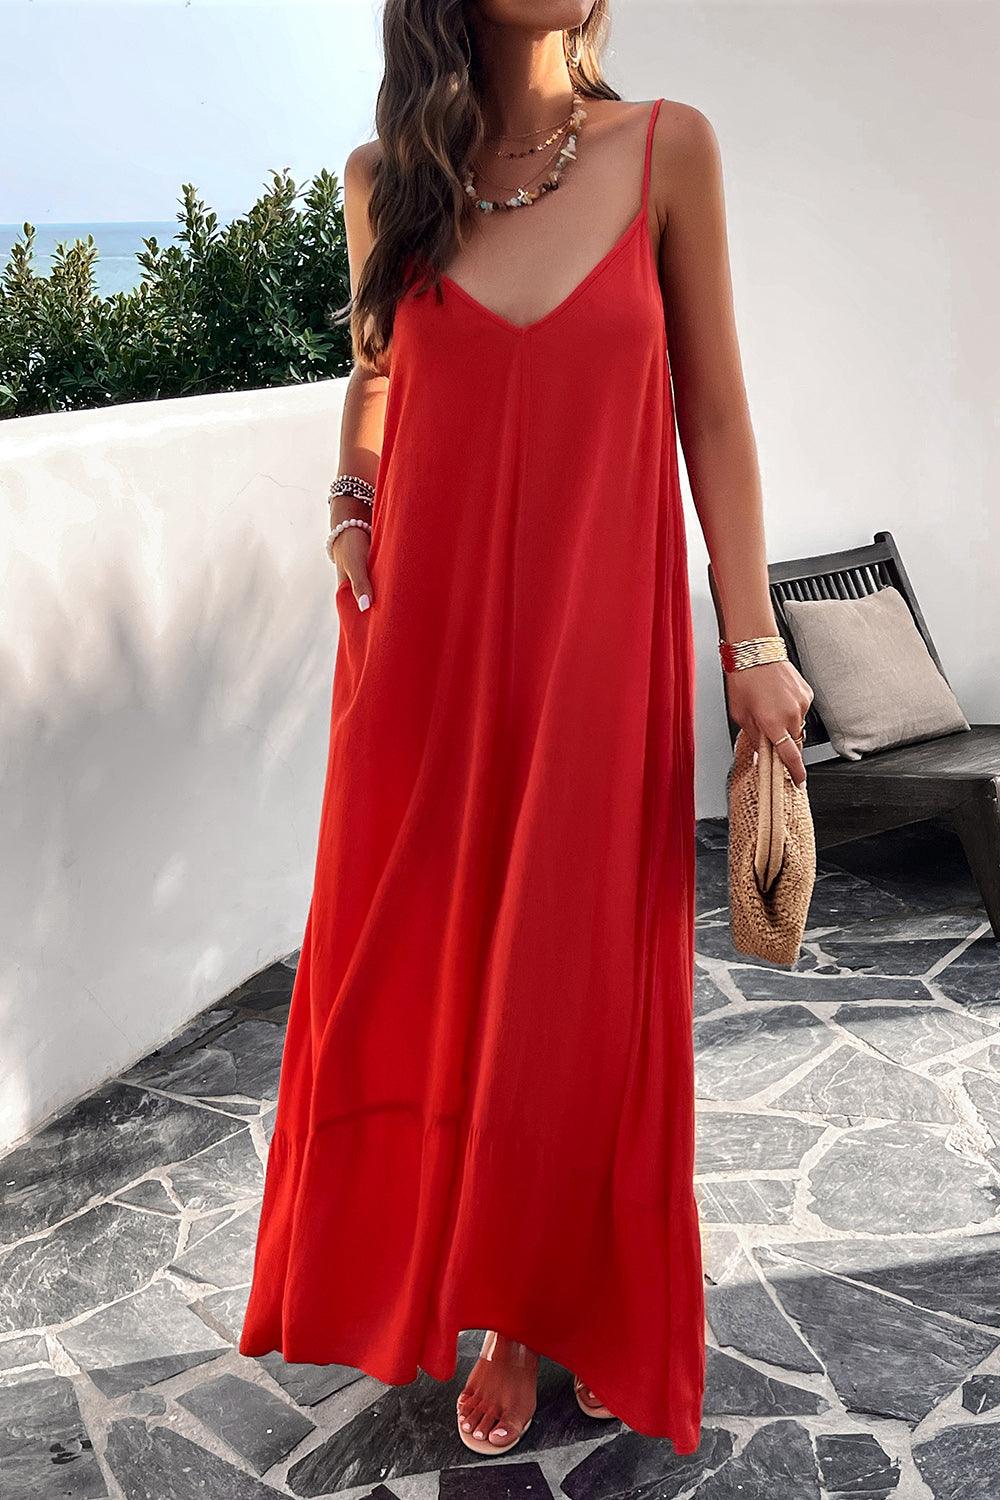 a woman in a red dress standing on a patio